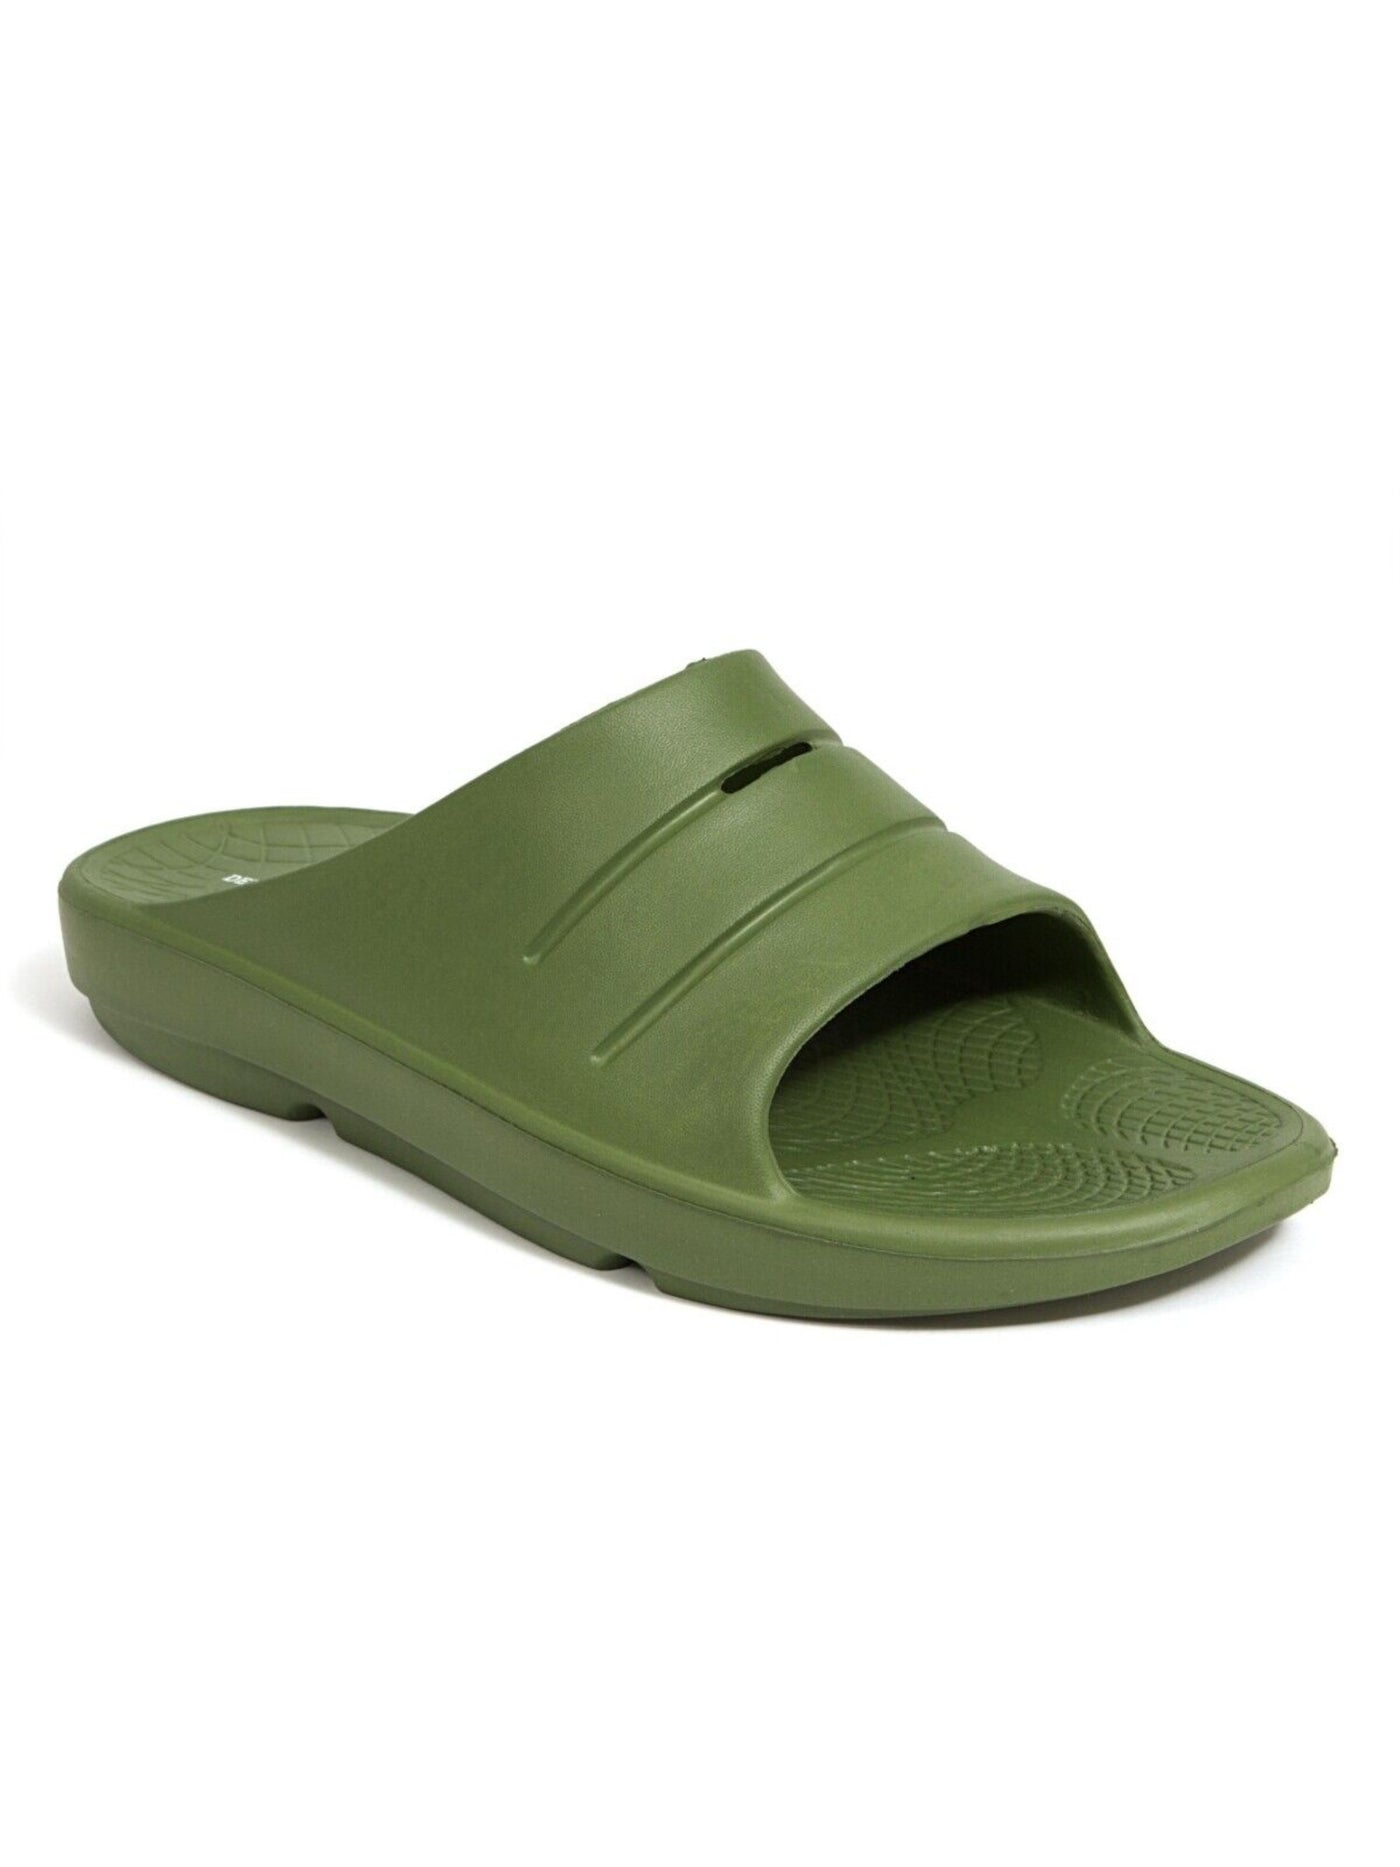 DEER STAGS Mens Green Molded Footbed Cushioned Ward Round Toe Slip On Slide Sandals Shoes 9 M